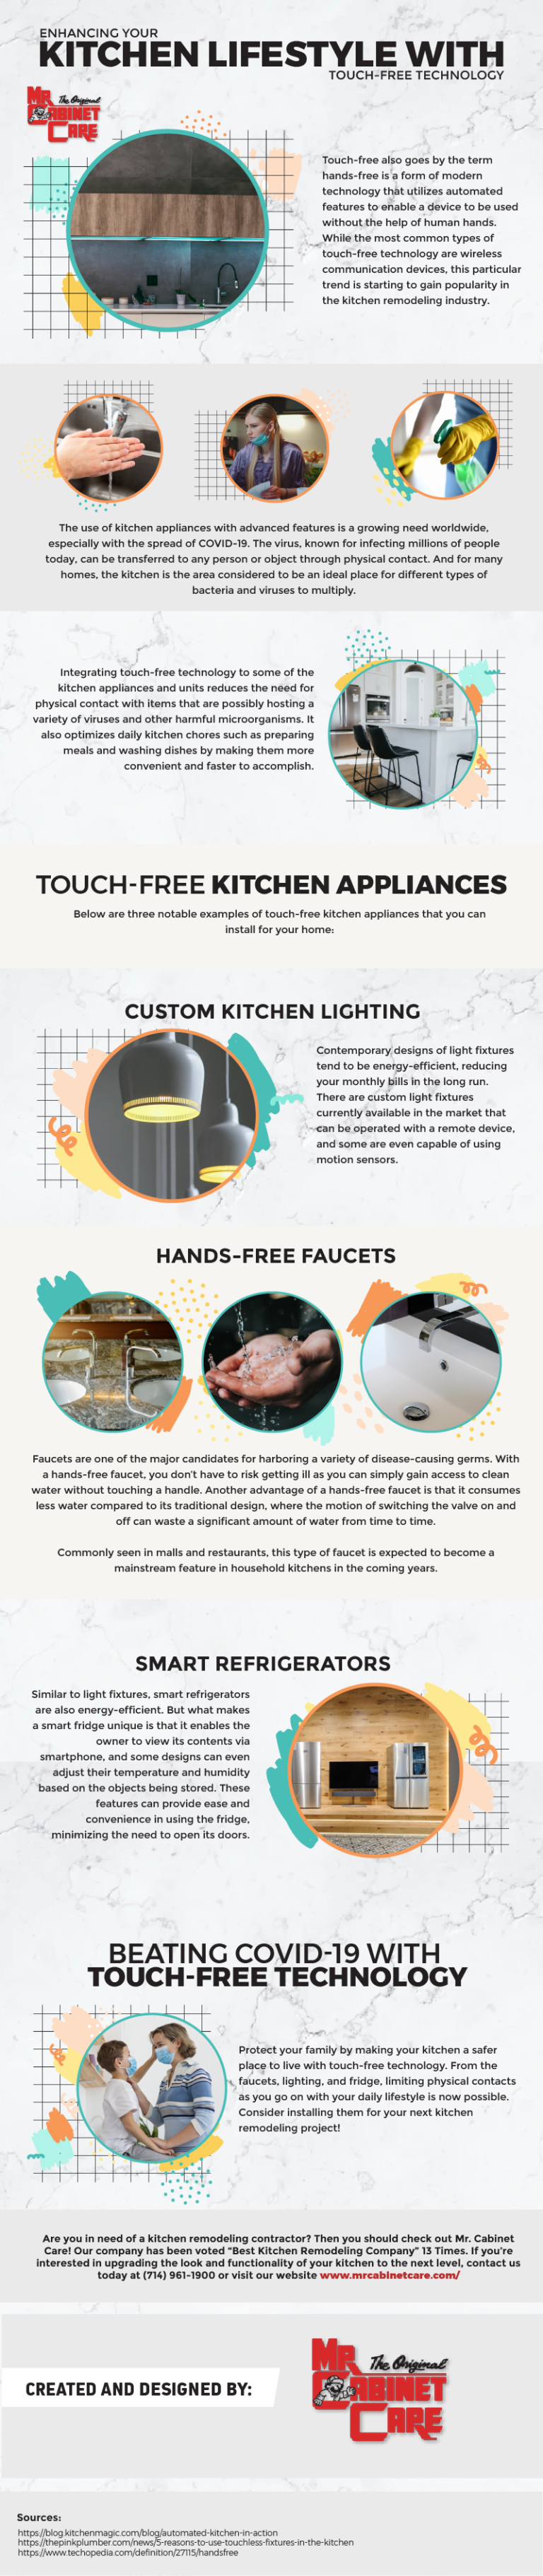 Enhancing Your Kitchen Lifestyle with Touch-Free Technology